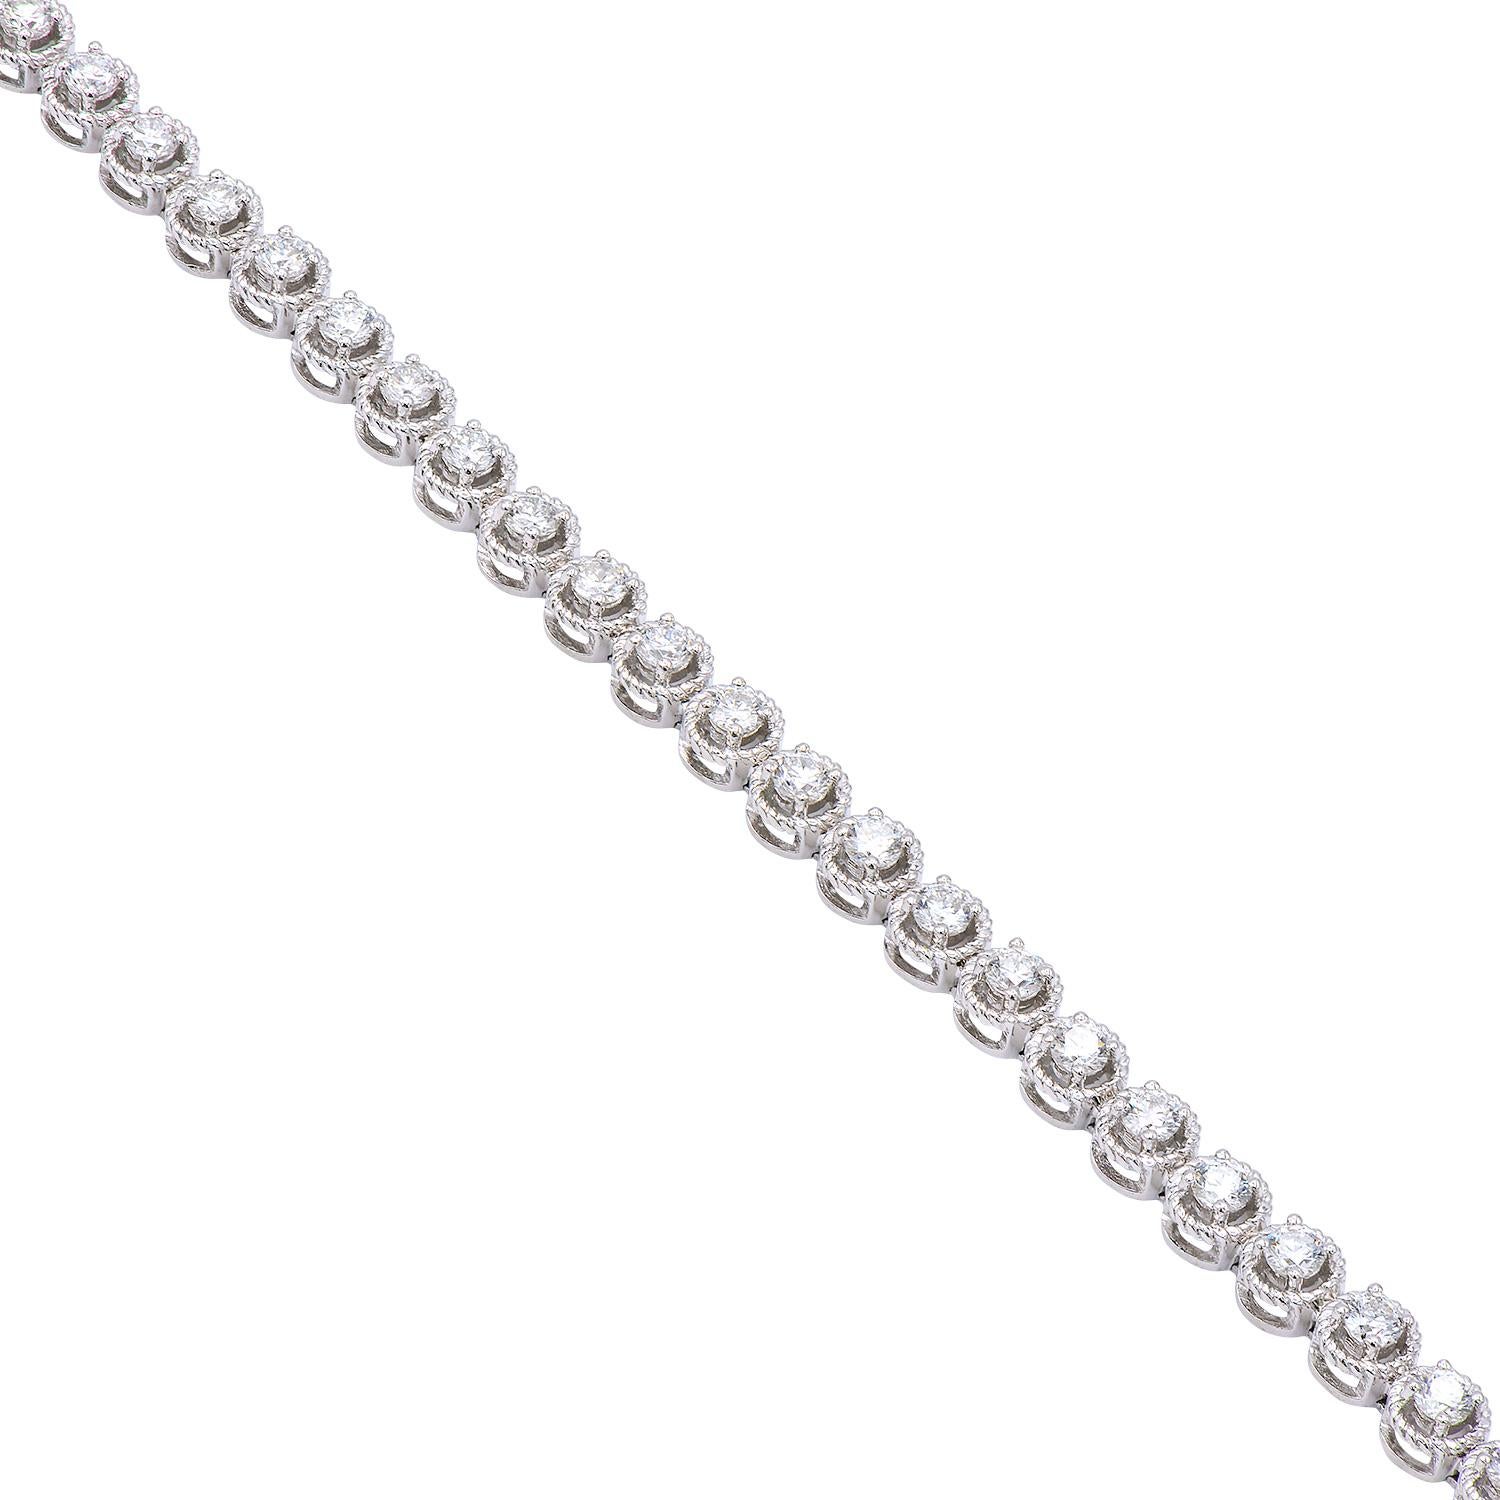 This 14 karat white gold bracelet uses a millgrain technique to add special detail to each of the 72 round SI, H color diamonds. The 3.9 grams of gold expertly circle and enhance the 1.00 carats of diamonds to create a special and beautiful